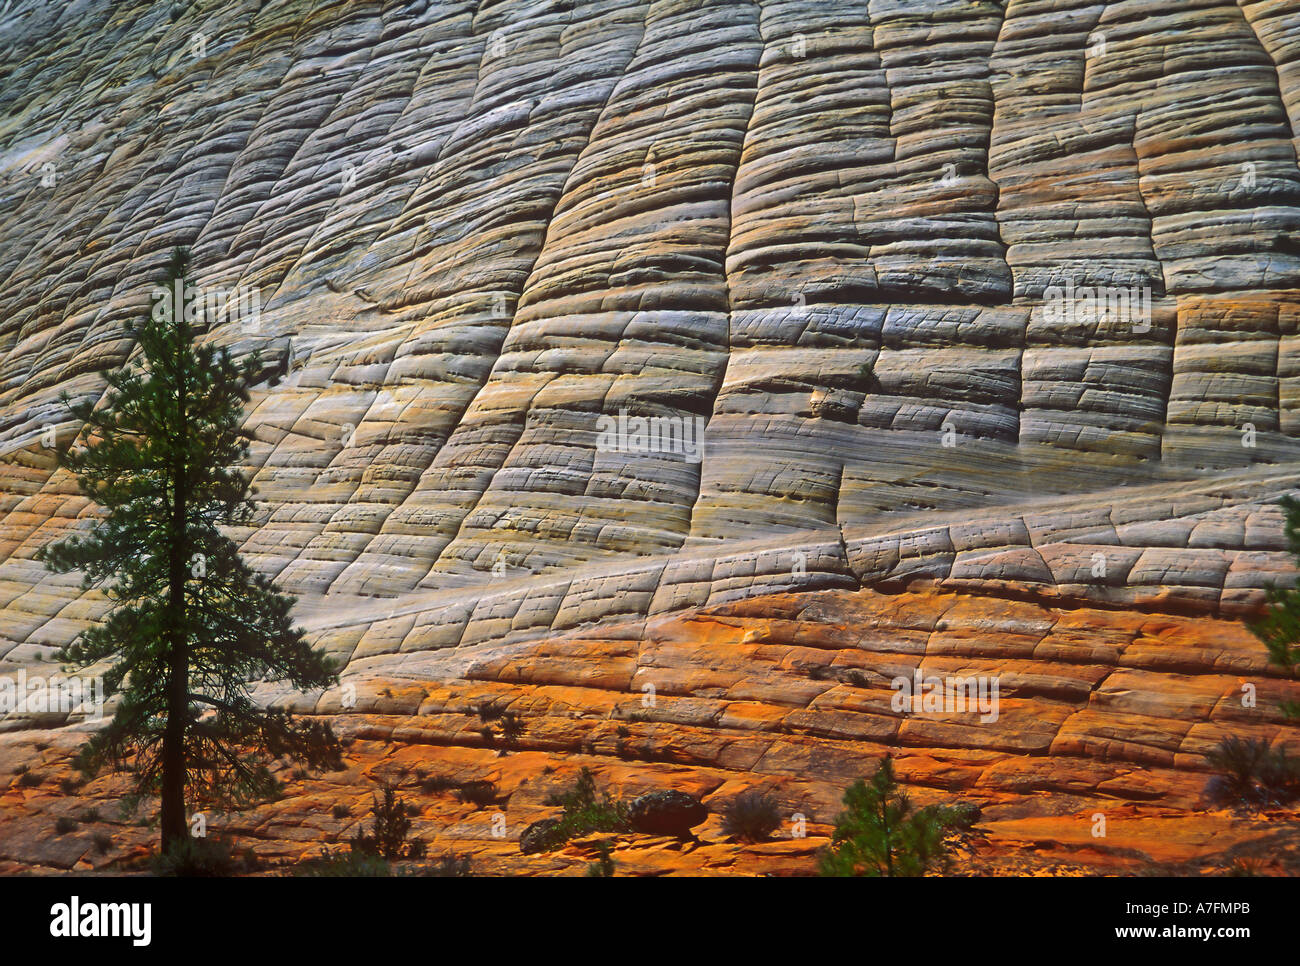 Detail of Checkerboard Mesa at Zion National Park, showing the unusual rock  formation. Utah, USA Stock Photo